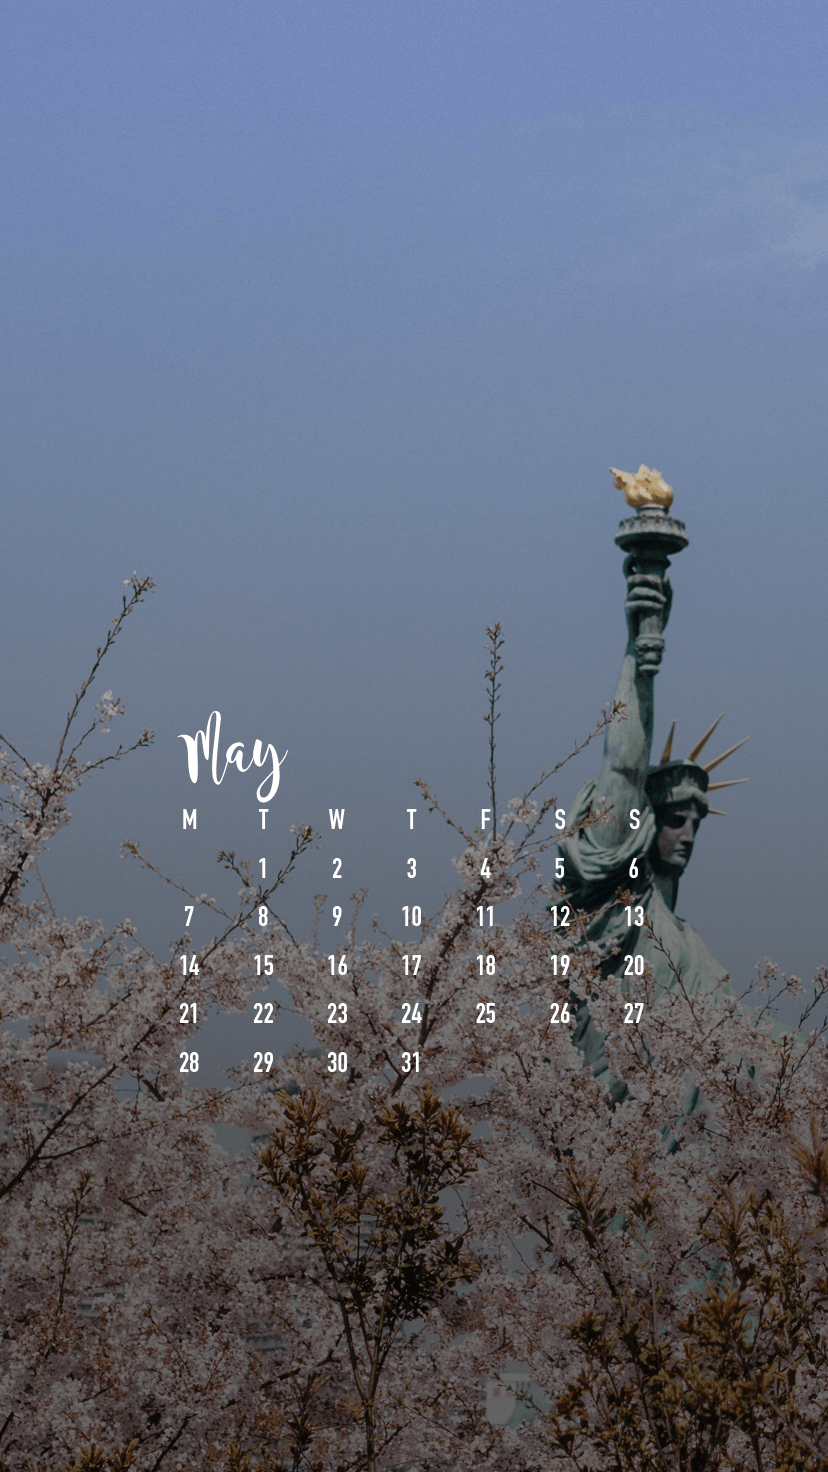 Free 2018 calendar wallpaper for your phone